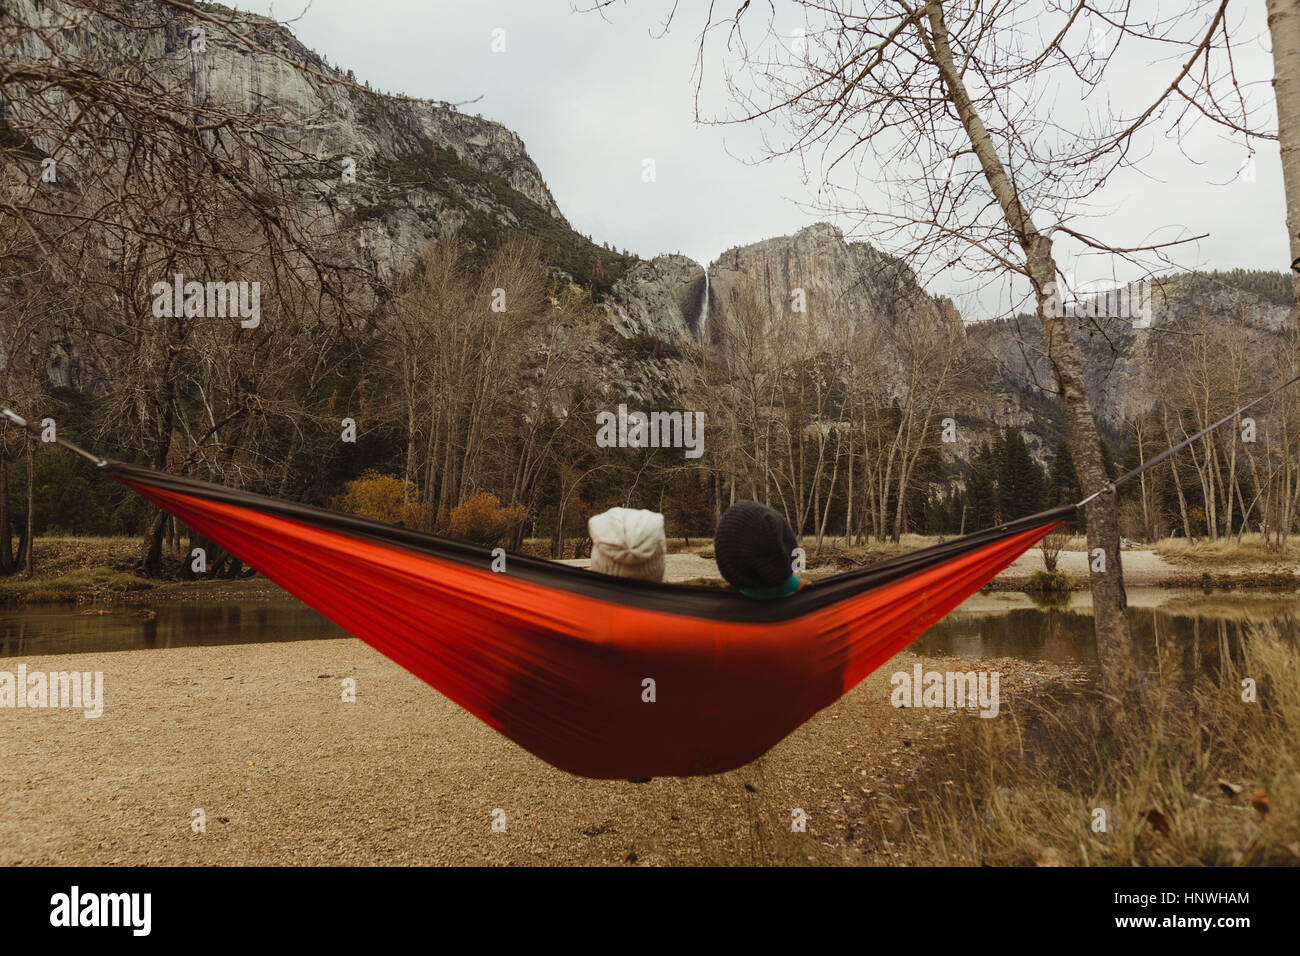 Rear view of couple reclining in red hammock looking out at landscape, Yosemite National Park, California, USA Stock Photo